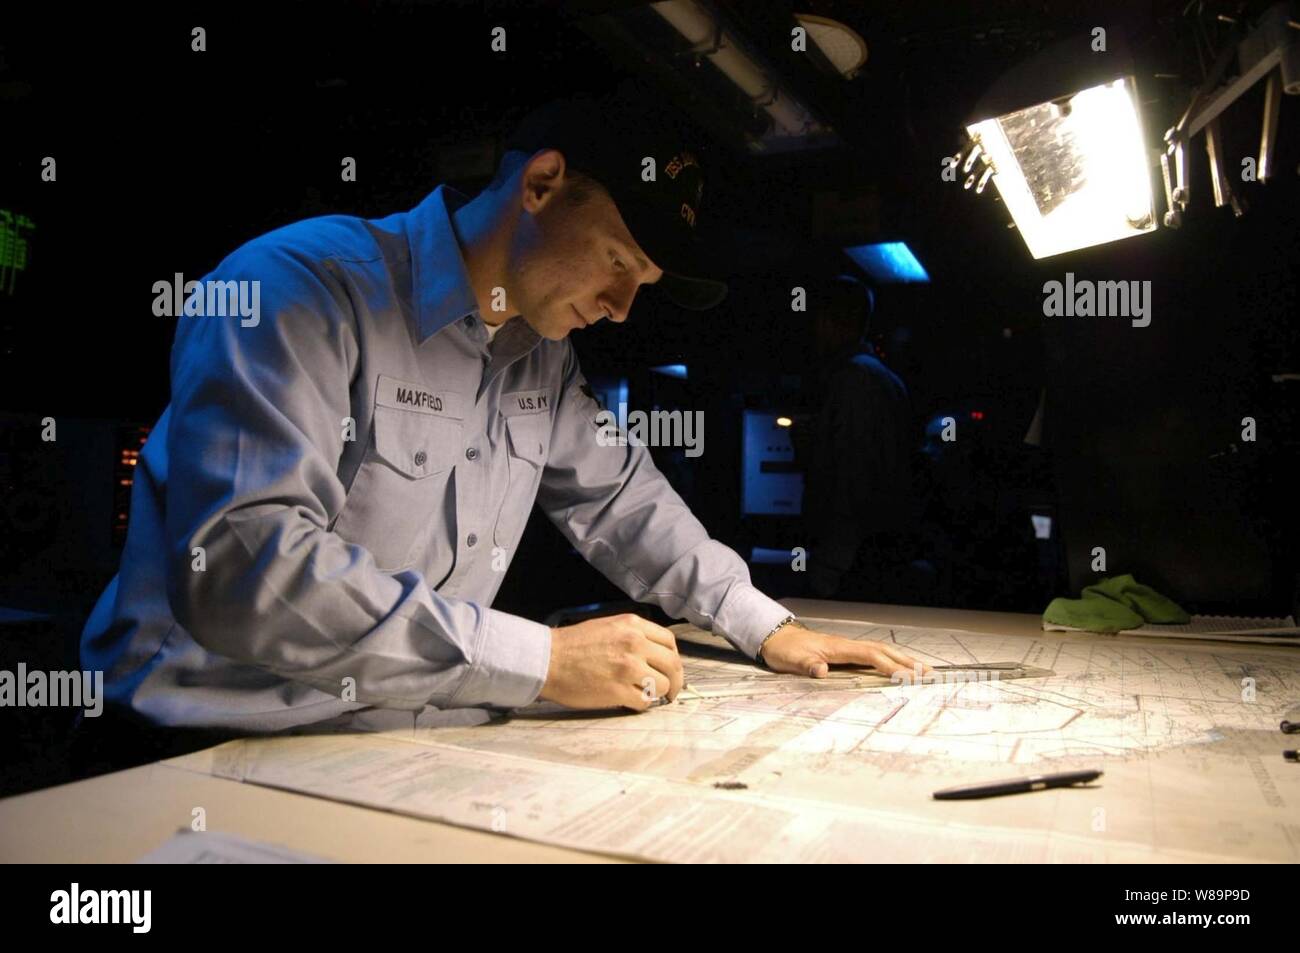 Navy Petty Officer 2nd class Ryan E. Maxfield plots the ship's position on a navigational chart aboard the aircraft carrier USS Abraham Lincoln (CVN 72) on Aug. 18, 2004.  The Lincoln is currently conducting operations in preparation for an upcoming deployment.  Ryan is a Navy operations specialist. Stock Photo